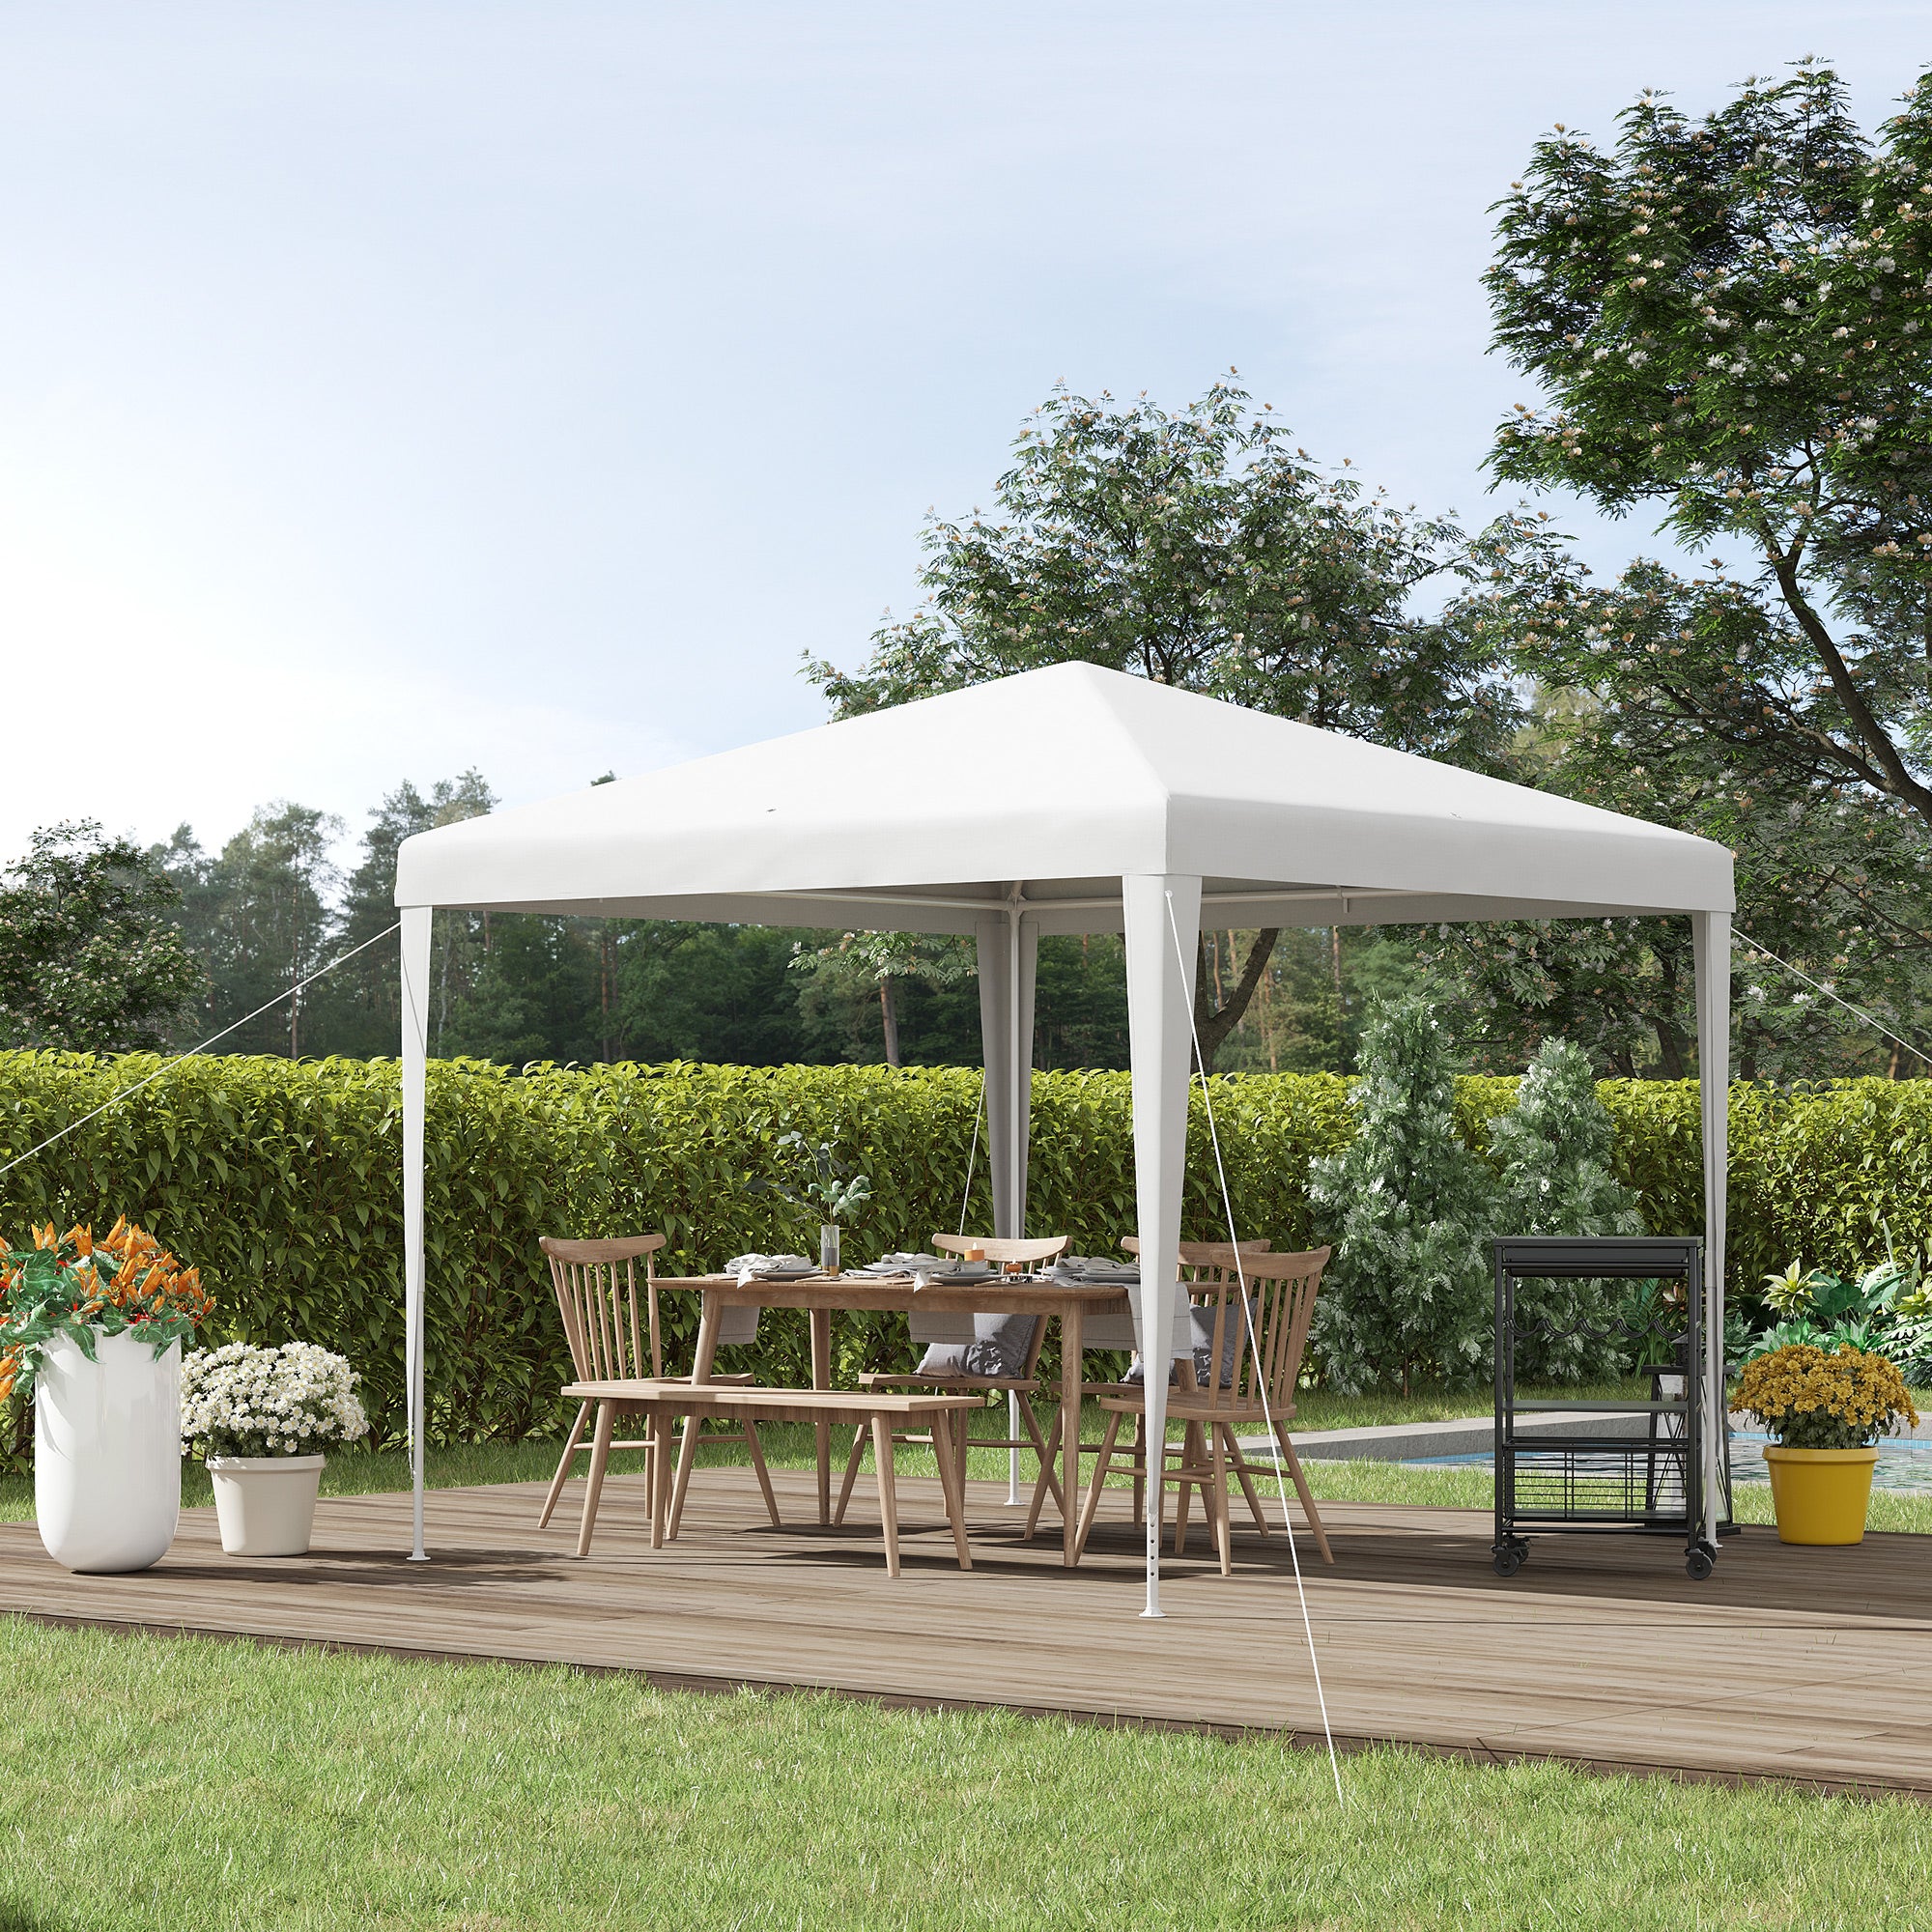 Outsunny 2.7m x 2.7m Garden Gazebo Marquee Party Tent Wedding Canopy Outdoor, White